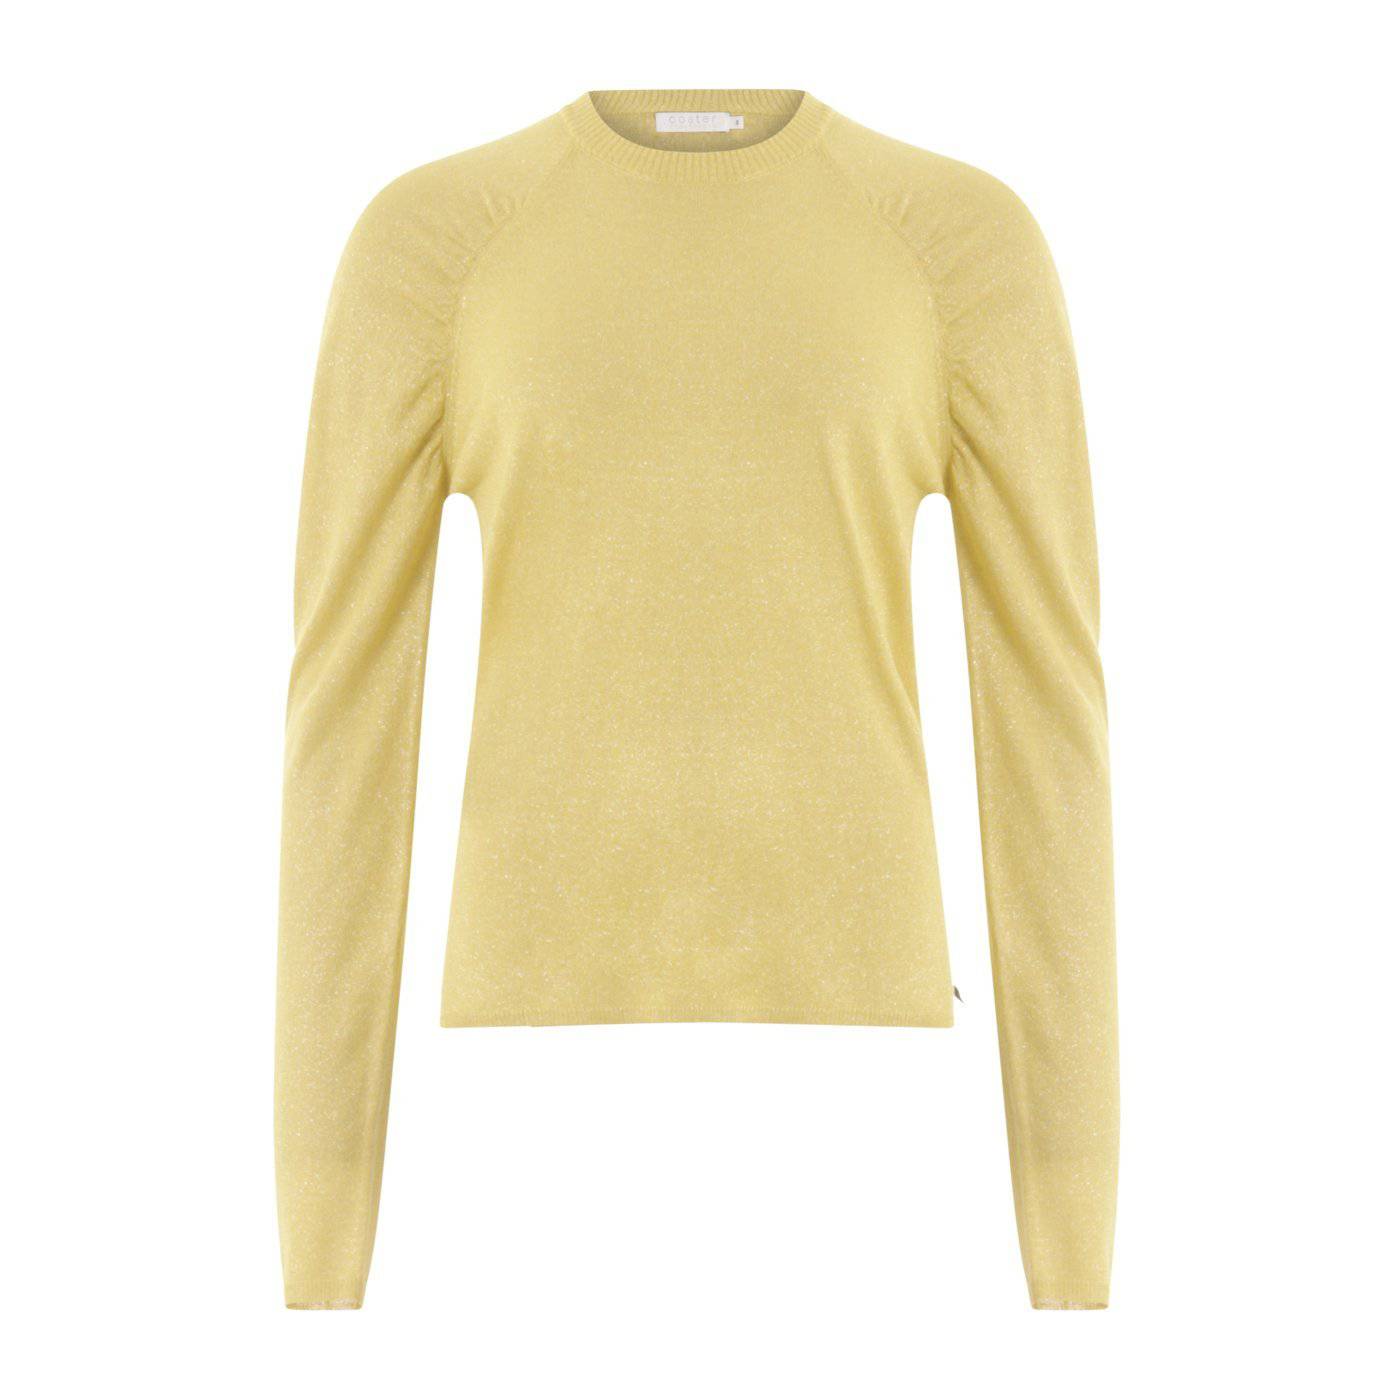 Coster Copenhagen yellow knit blouse in lurex with volume at shoulder - Your Style Your Story